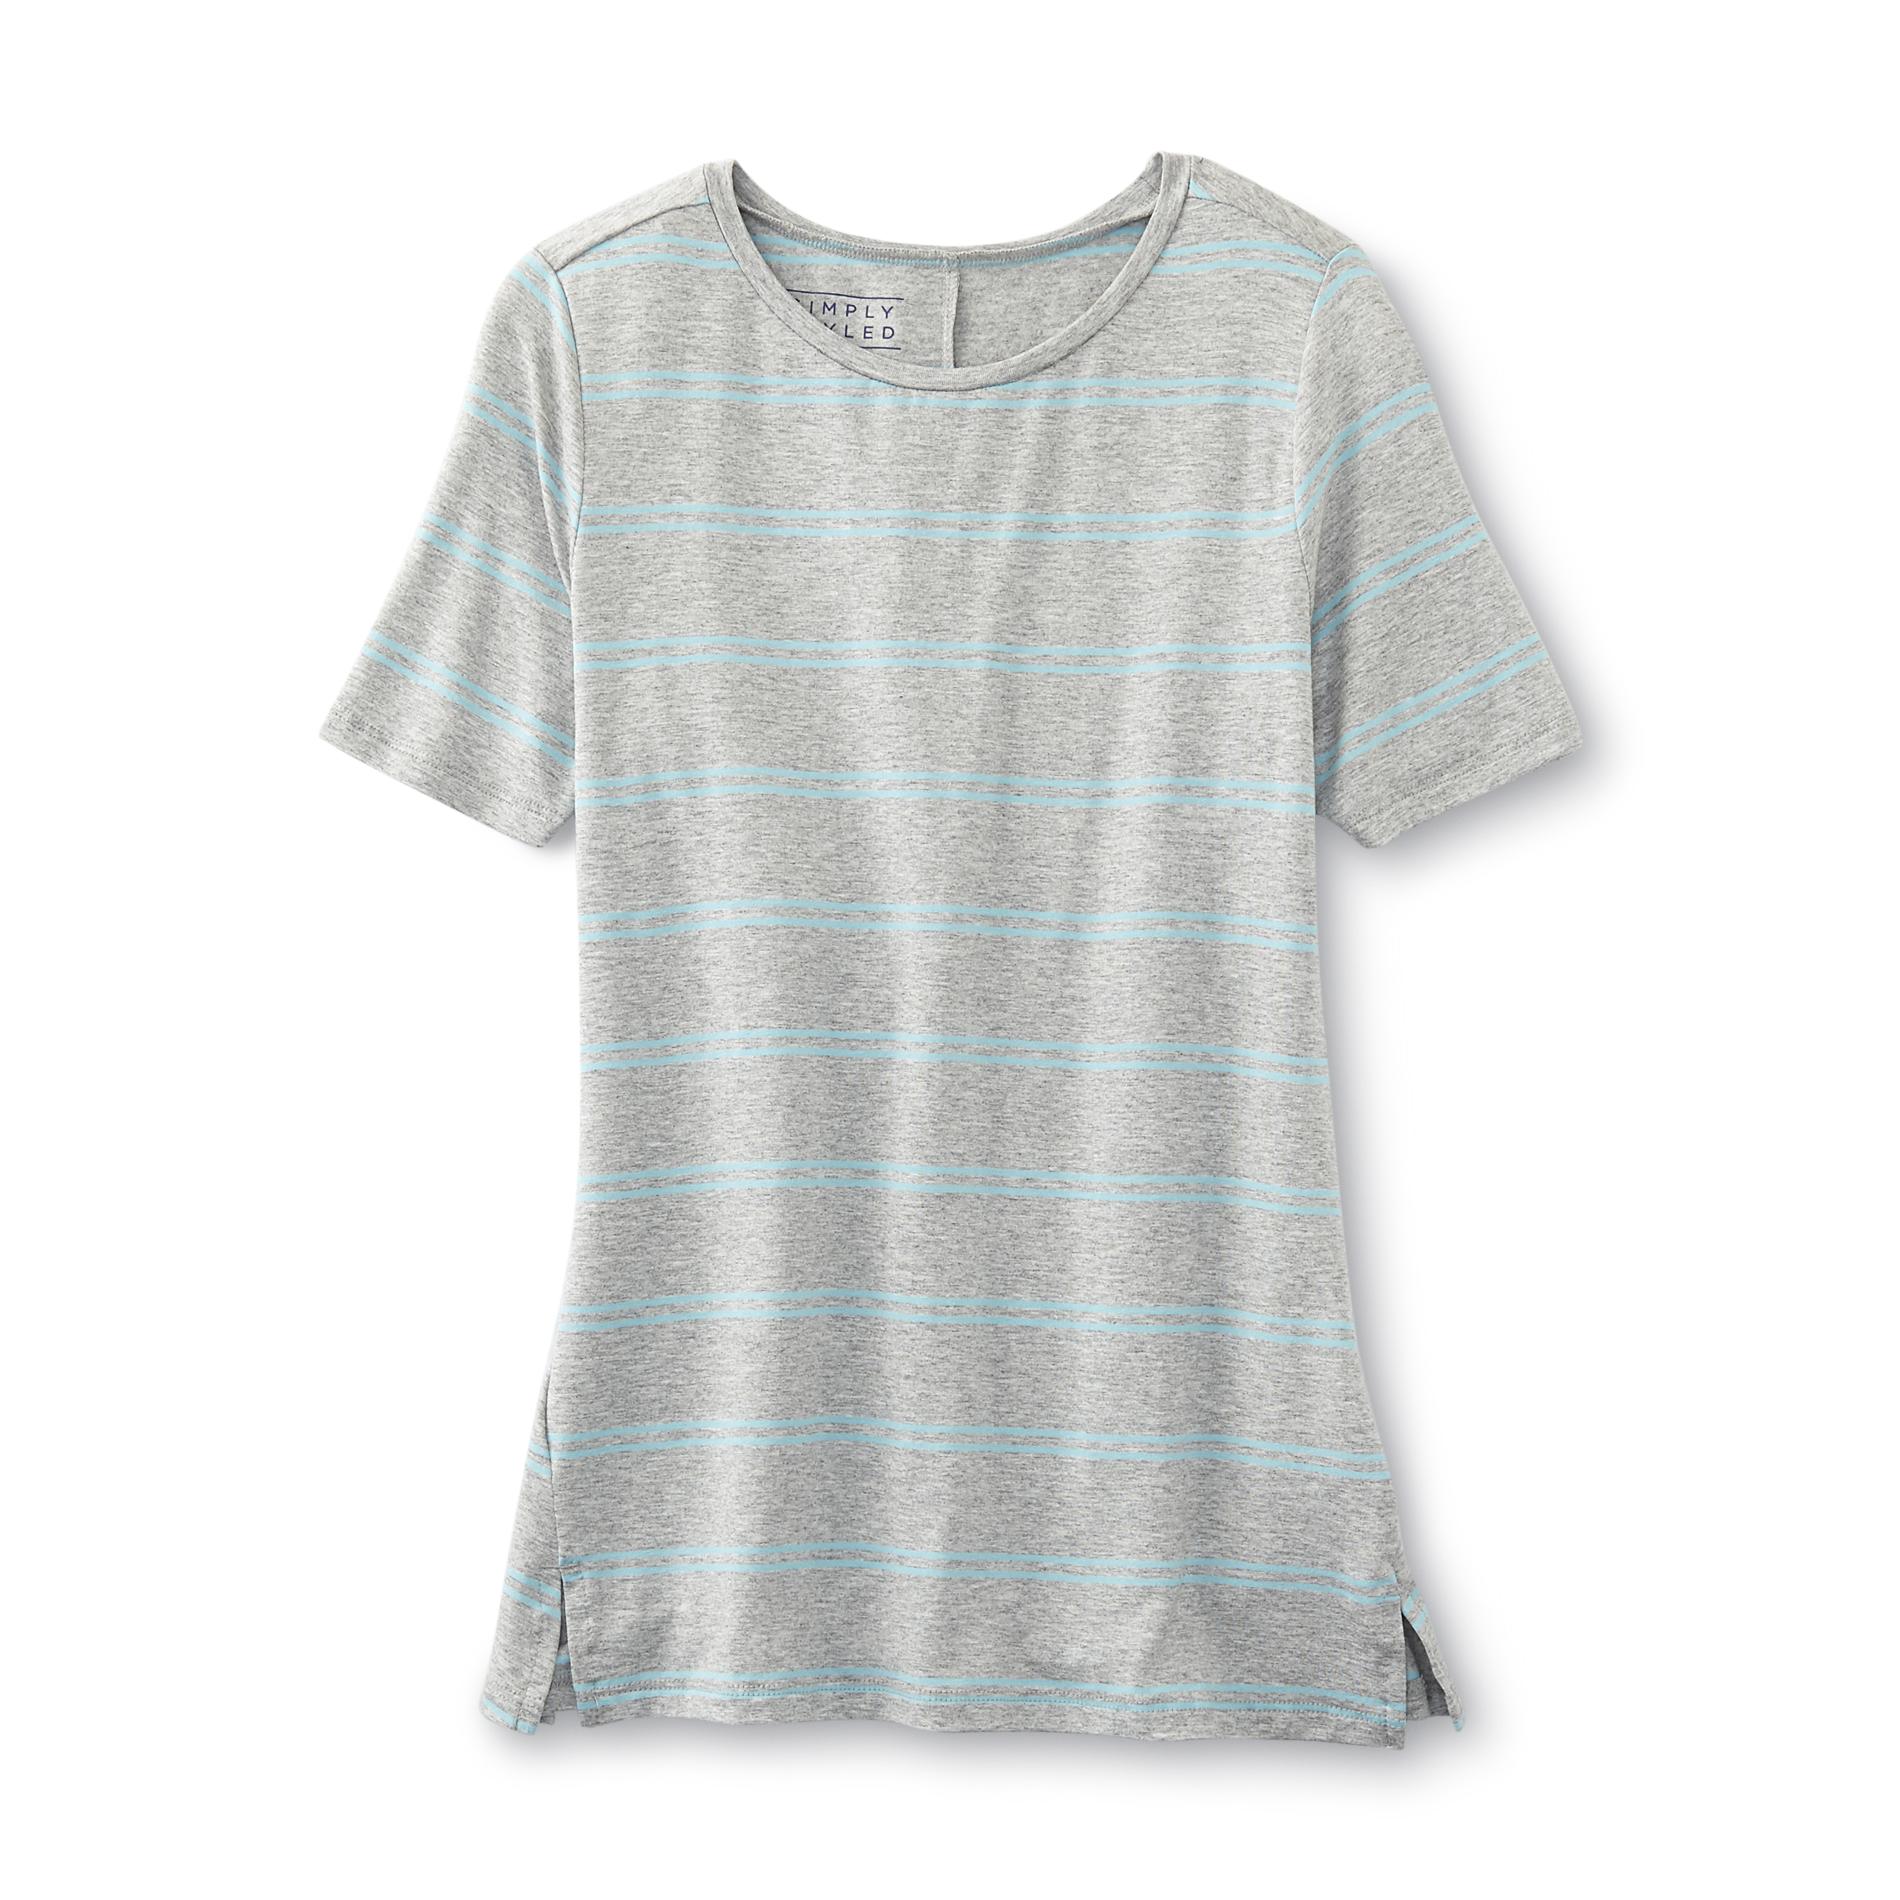 Simply Styled Girl's Knit Tunic - Striped